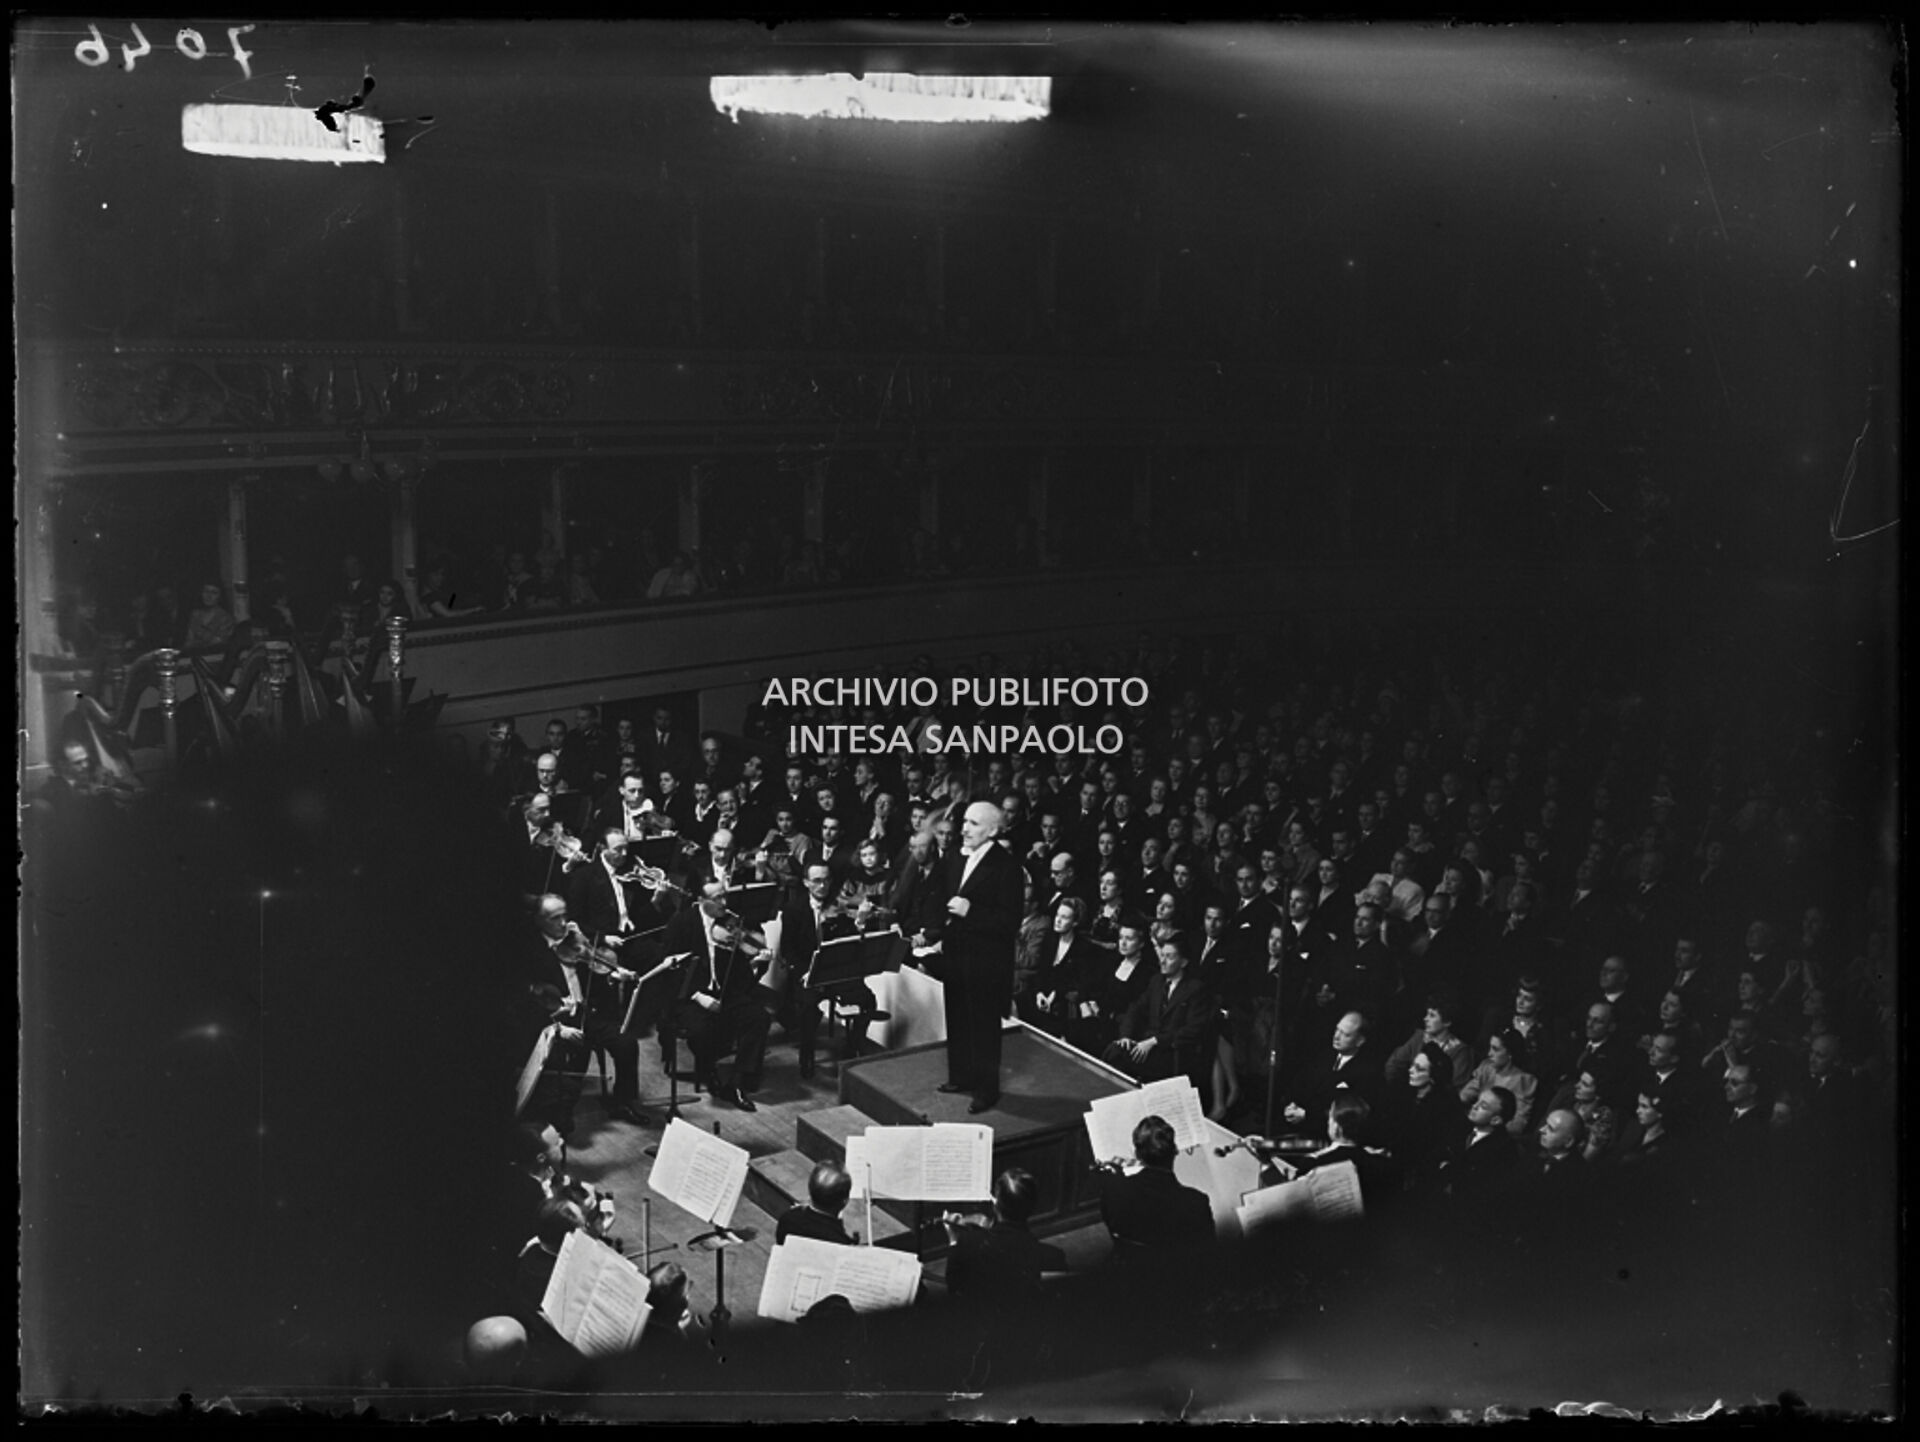 Arturo Toscanini conducts for the re-opening concert at the Teatro della Scala following post-war rebuilding